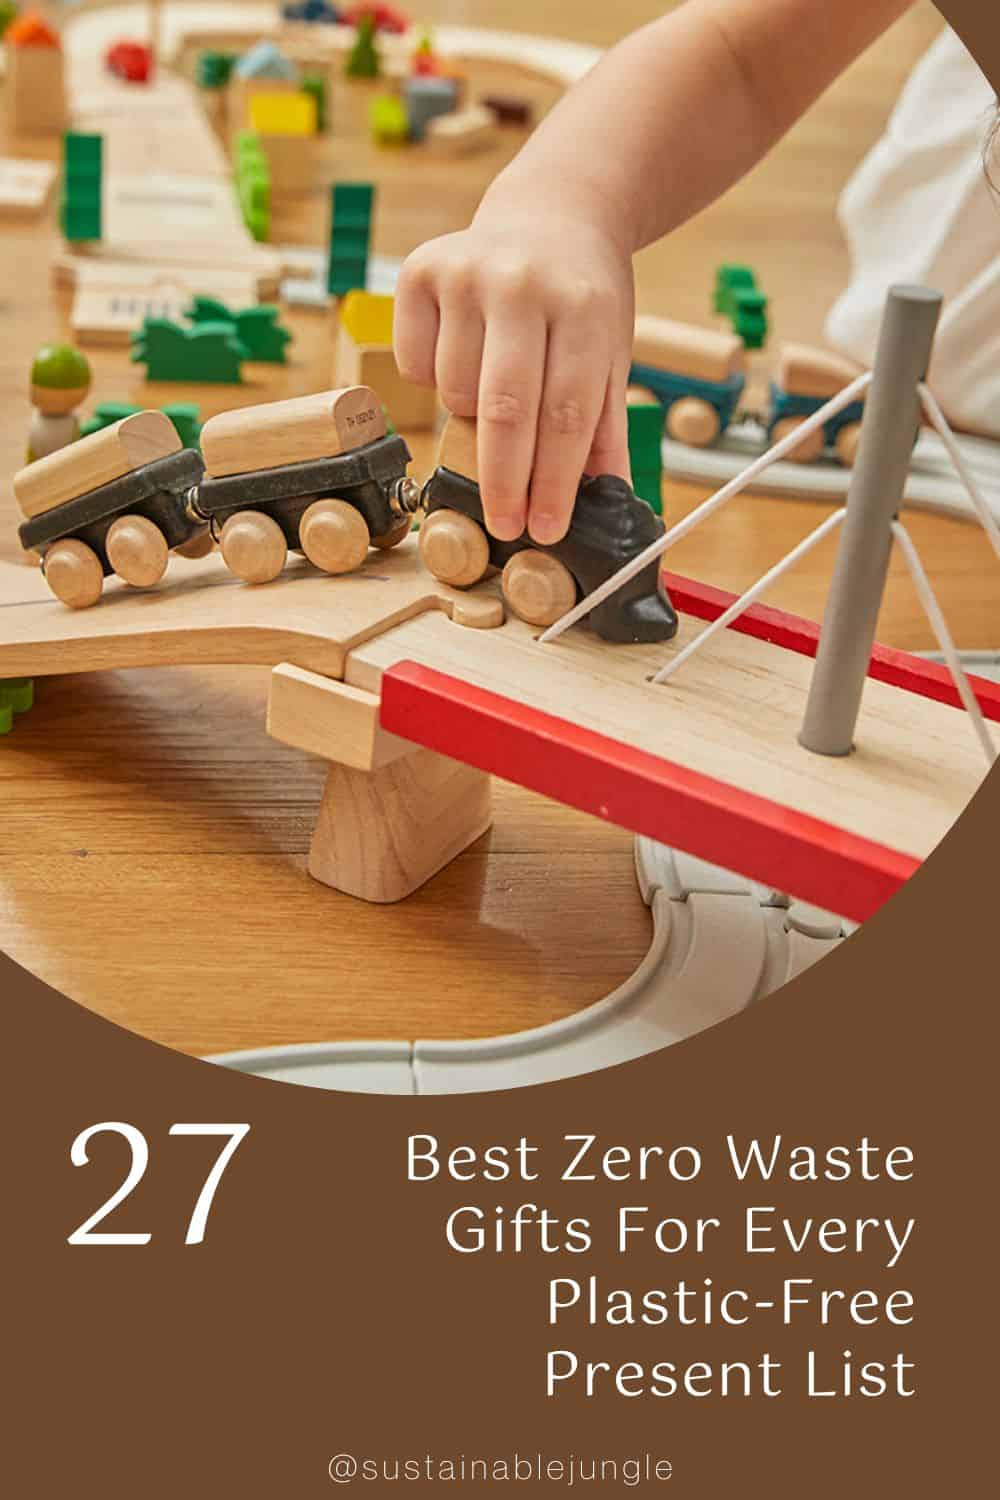 27 Best Zero Waste Gifts For Every Plastic-Free Present List Image by PlanToys #zerowastegifts #bestzerowastegifts #zerowasteChristmasgifts #zerowastegiftideas #plasticfreegifts #giftsforplasticfreeliving #sustainablejungle